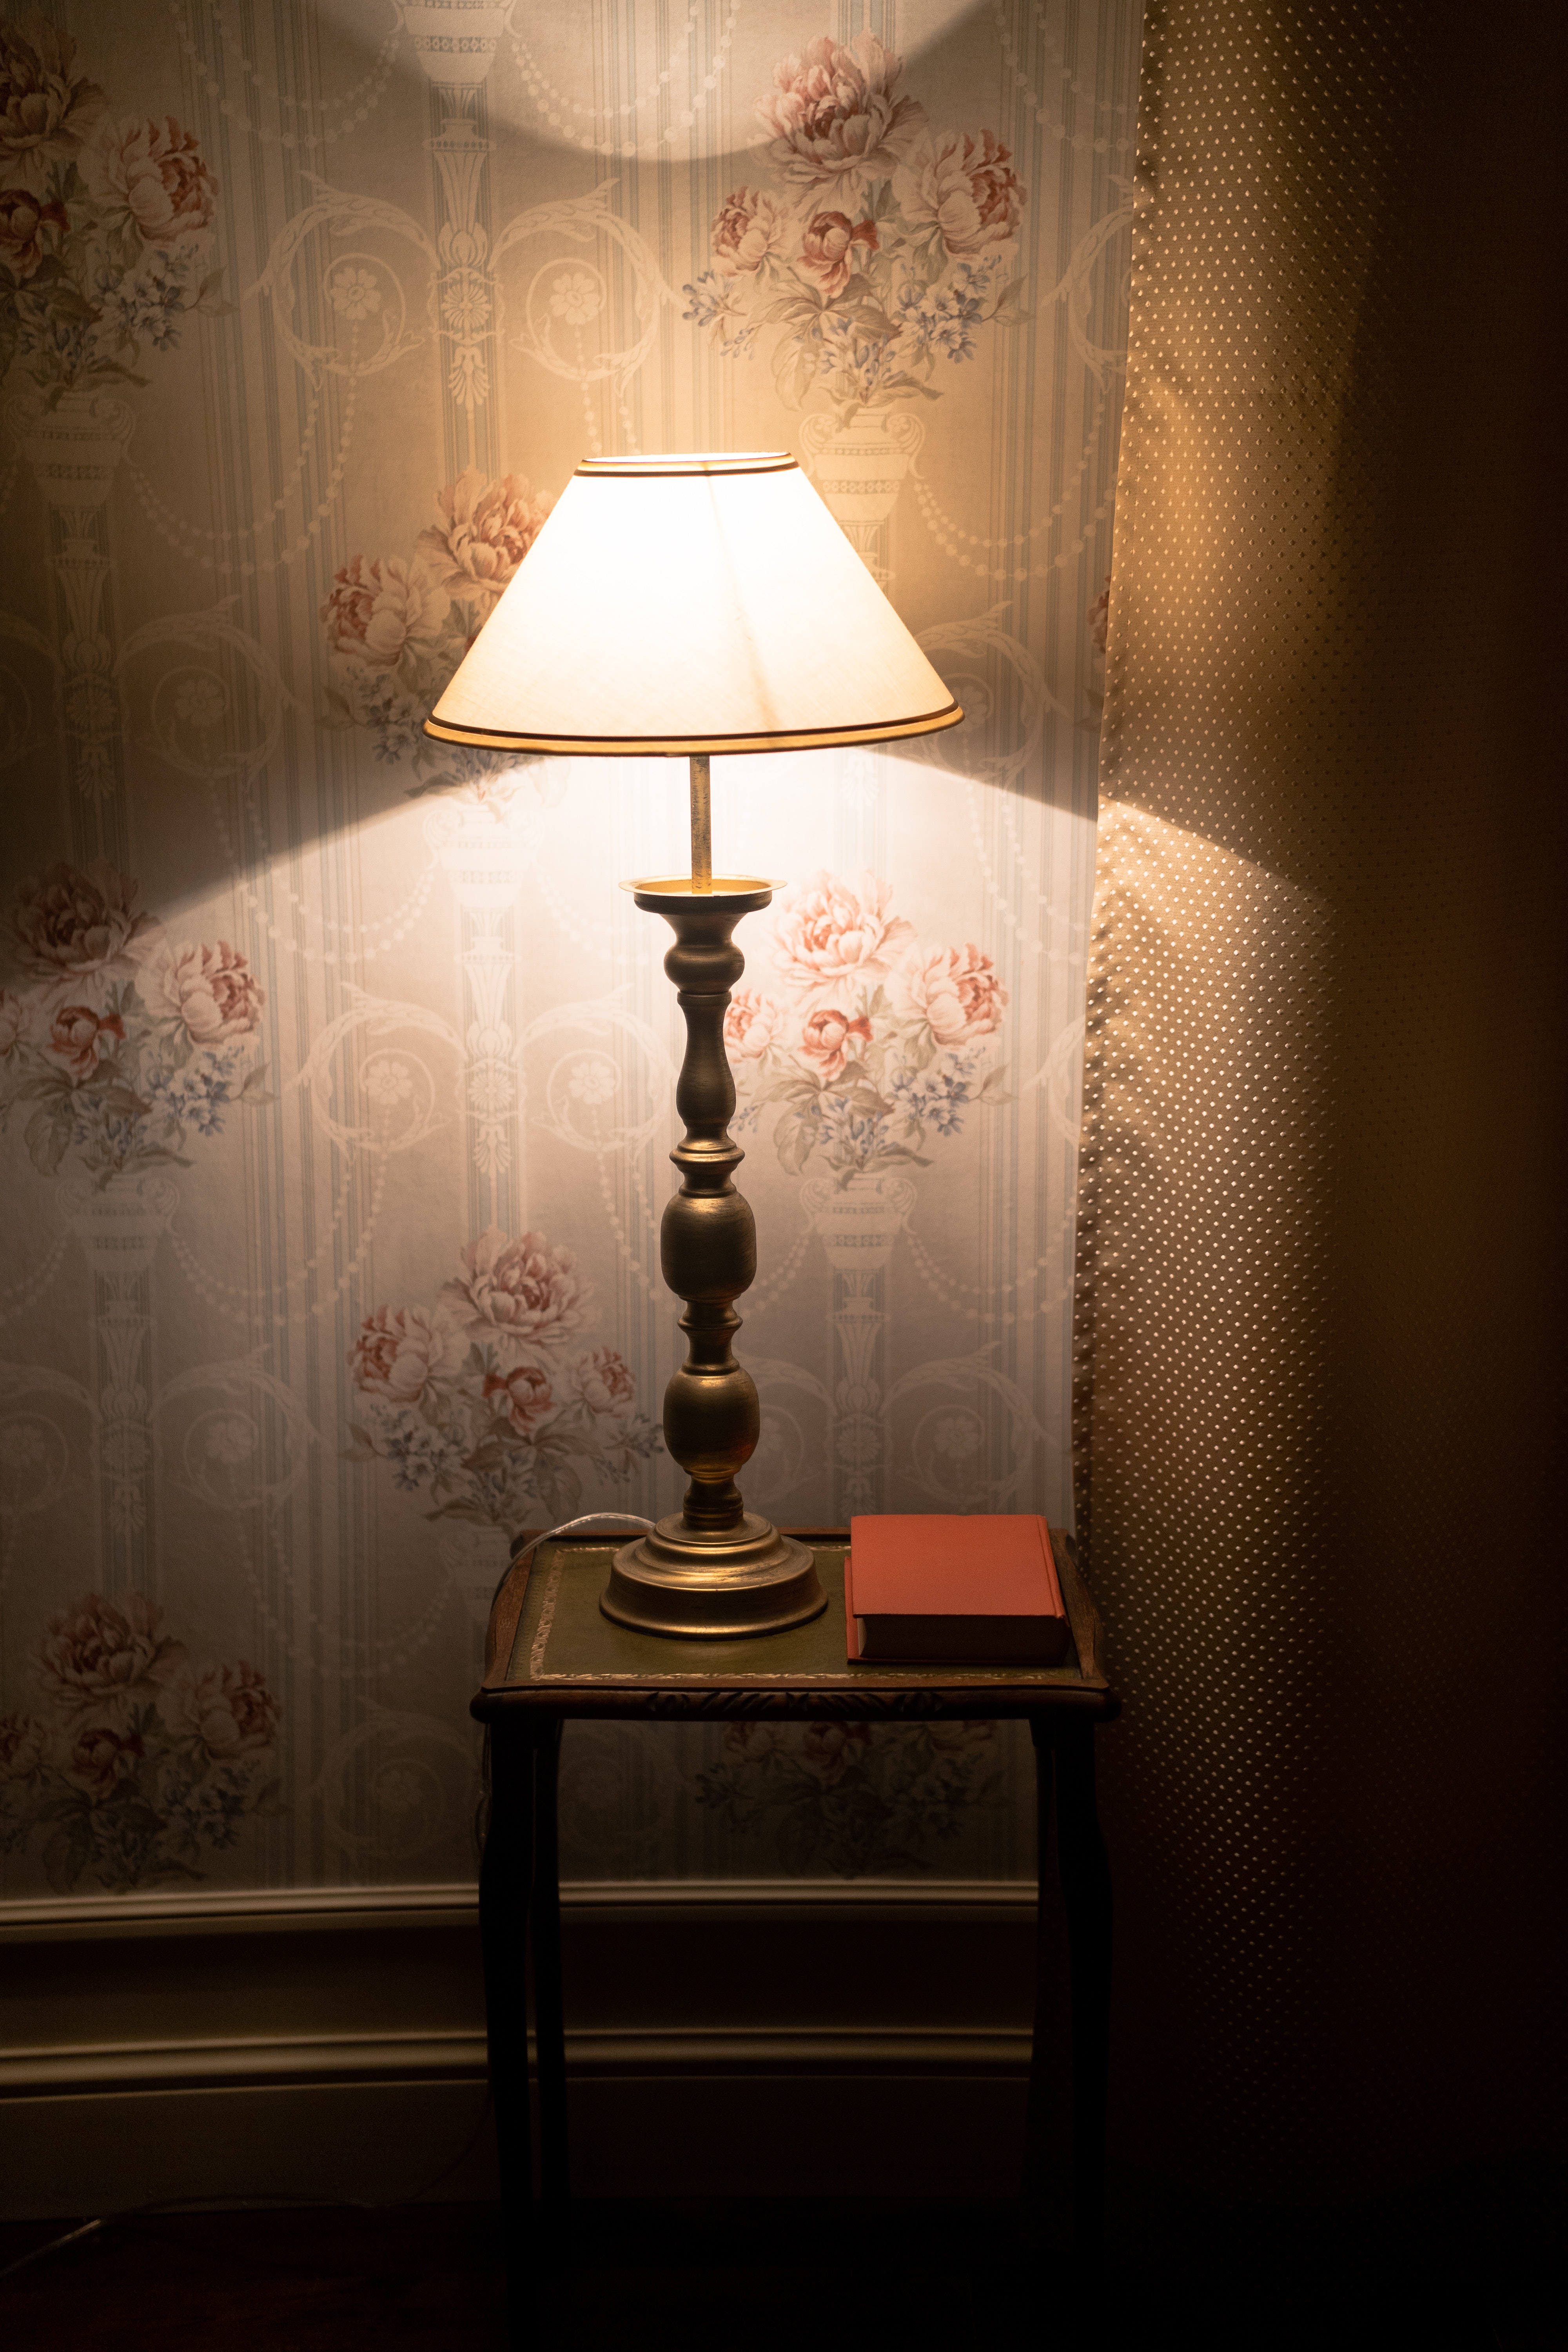 A small table lamp with a brass base and cream drum lampshade illuminates a table and wallpaper.